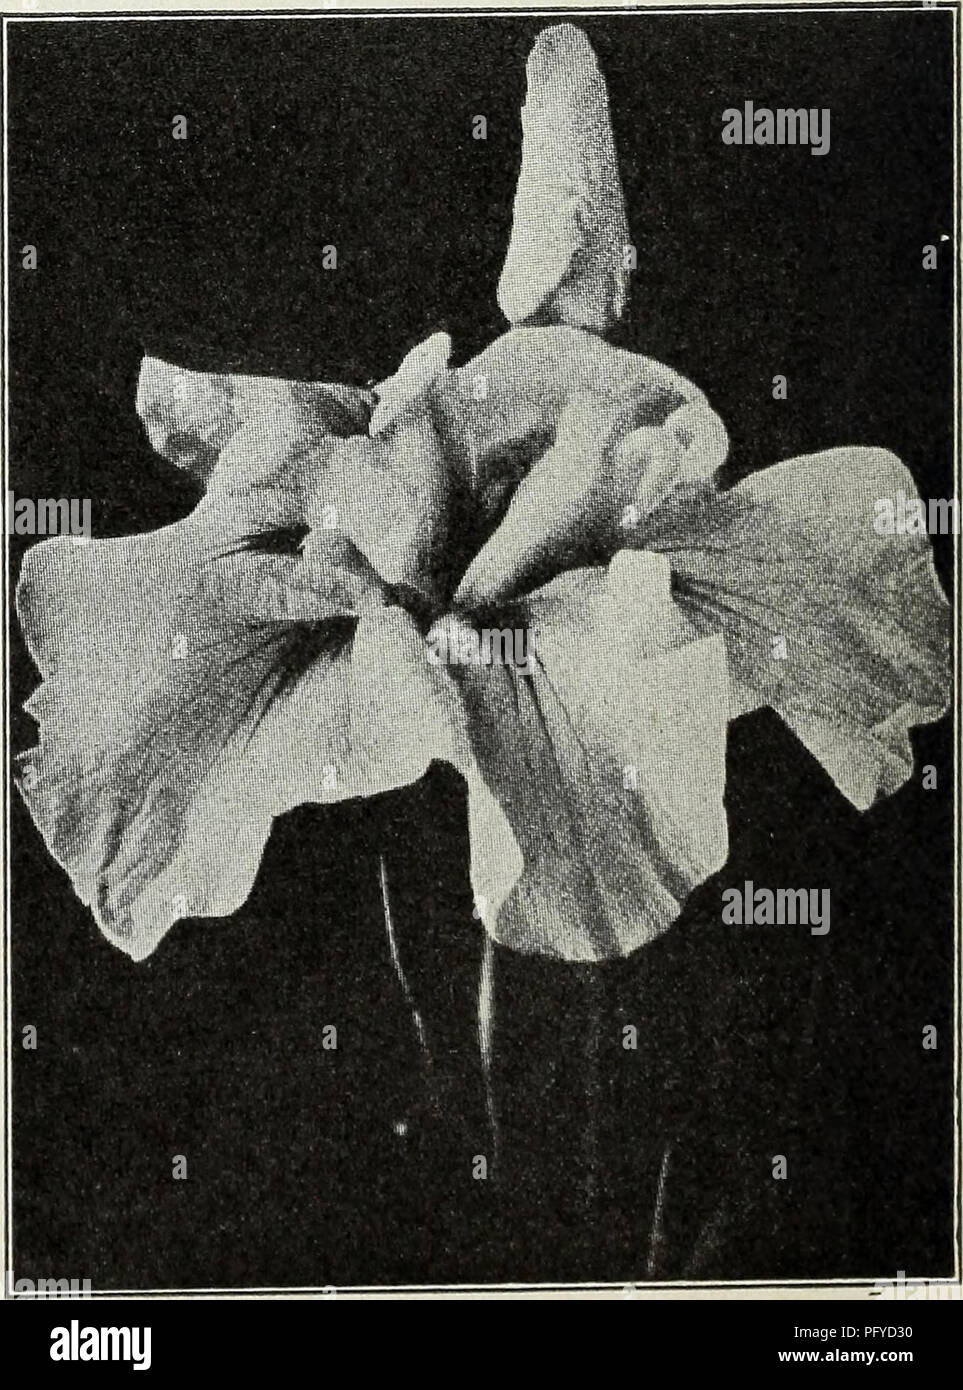 . Currie's autumn 1929 54th year bulbs and plants. Flowers Seeds Catalogs; Bulbs (Plants) Seeds Catalogs; Nurseries (Horticulture) Catalogs; Plants, Ornamental Catalogs. GERMAN IRIS An exceedingly hardy class, succeeding in almost any situation; a dry, sunny location suits them best. Caprice—Standards, reddish mauve; falls rosy red. Each, 35c. Fairy—Bluish white, fragrant. Gertrude—Standards and falls purplish-blue. Each 35c. Helga—Large, early yellow. Her Majesty—Standards lovely rose-pink; falls bright crimson, tinged a darker shade. Hetheranth—Standards bright blue; falls deeper, early. Jui Stock Photo